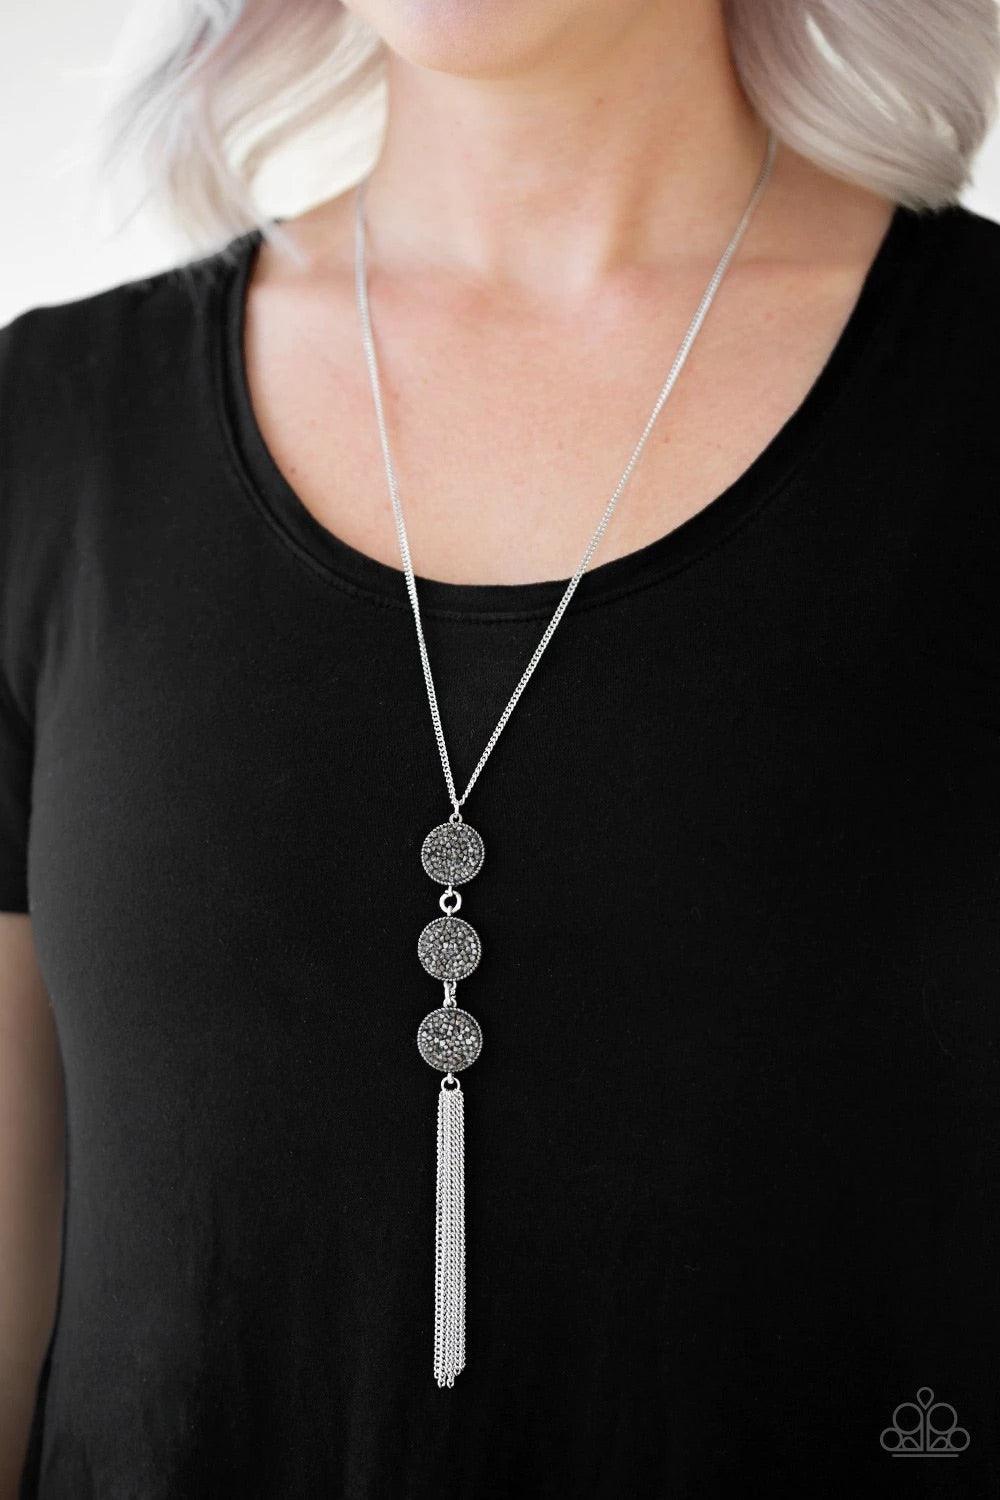 Paparazzi Accessories Triple Shimmer - Silver Sprinkled in smoky and hematite prism style rhinestones, three sparkling silver frames trickle down the chest. A shimmery silver tassel swings from the bottom of the triple stacked pendant for a glamorous fini